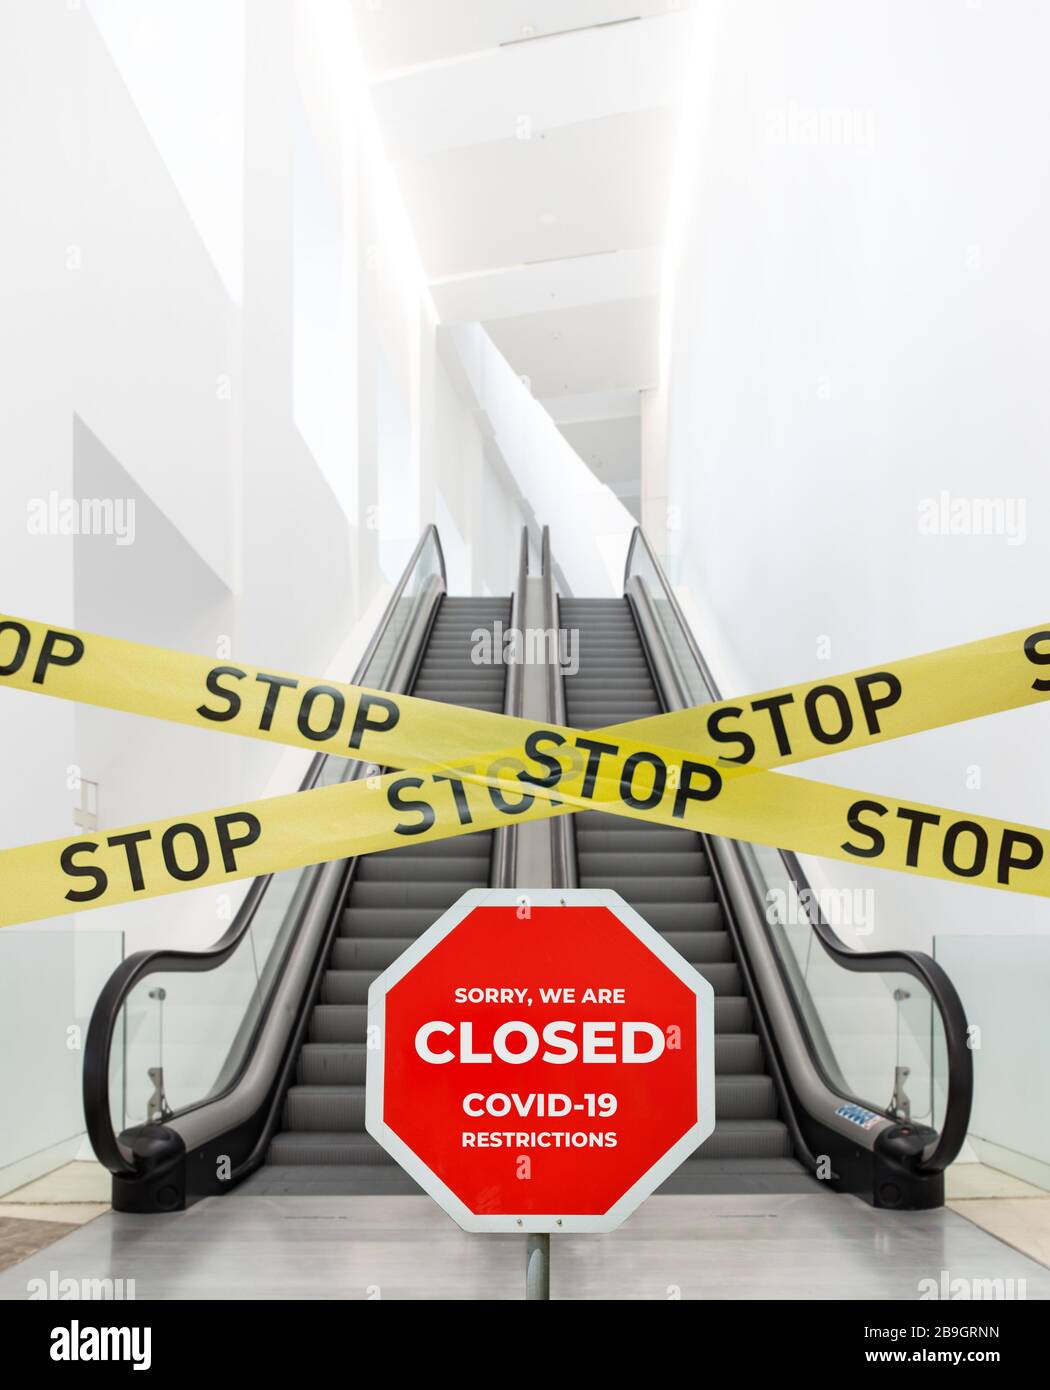 Scene of Public indoor with barrier tape and stop sign .Closed building during coronavirus COVID-19 epidemic concept Stock Photo